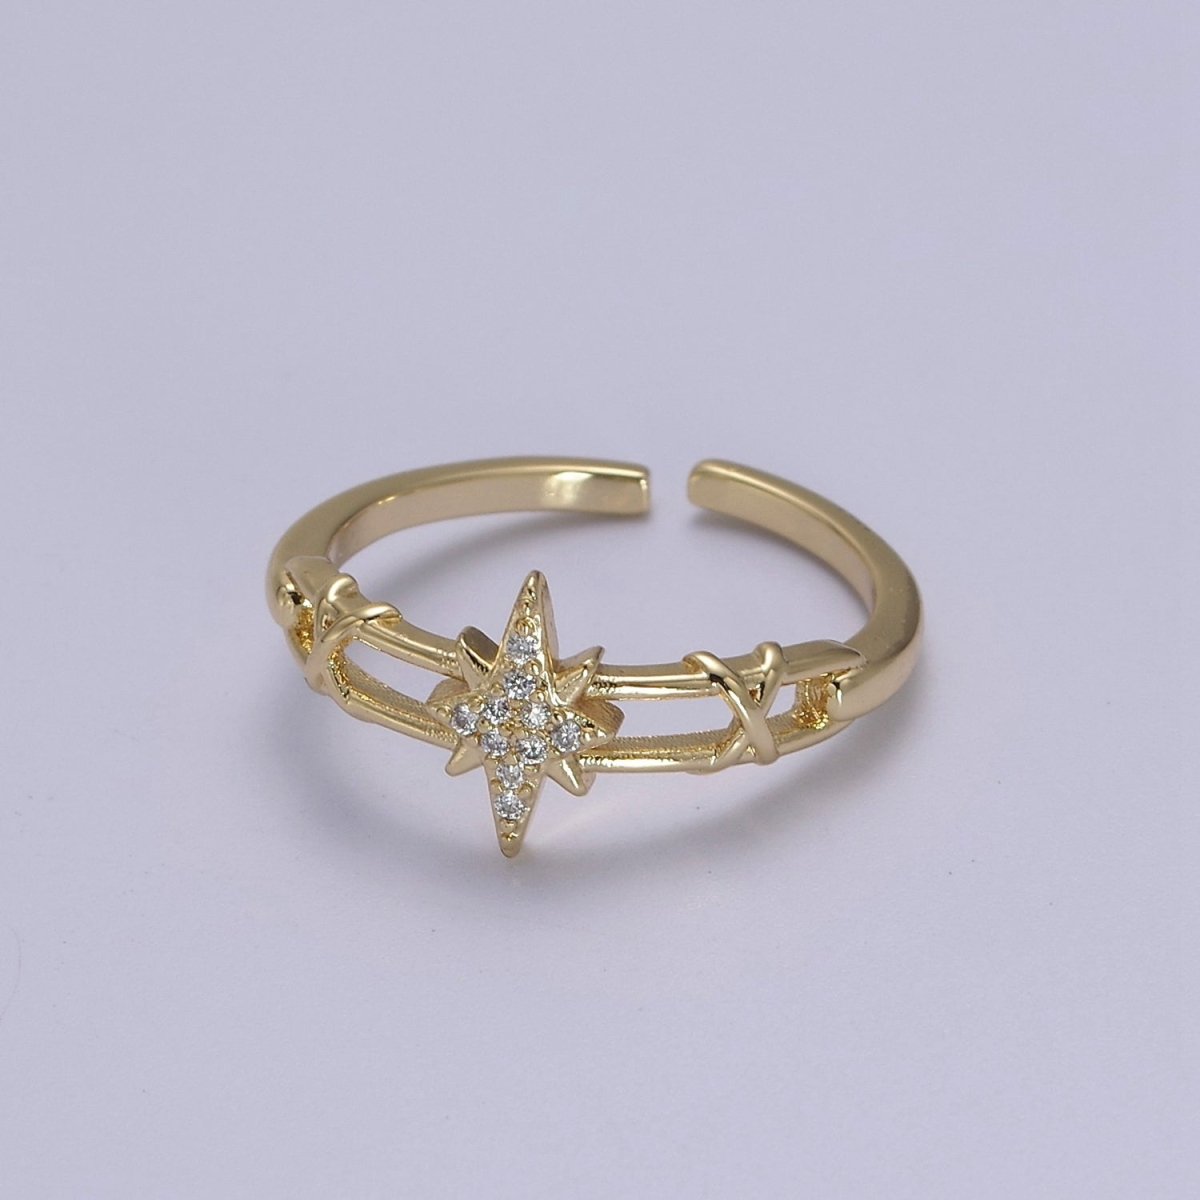 14K Gold Filled North Star Ring Celestial Ring Dainty Minimalist Jewelry Open Adjustable Ring S-456 S-457 - DLUXCA